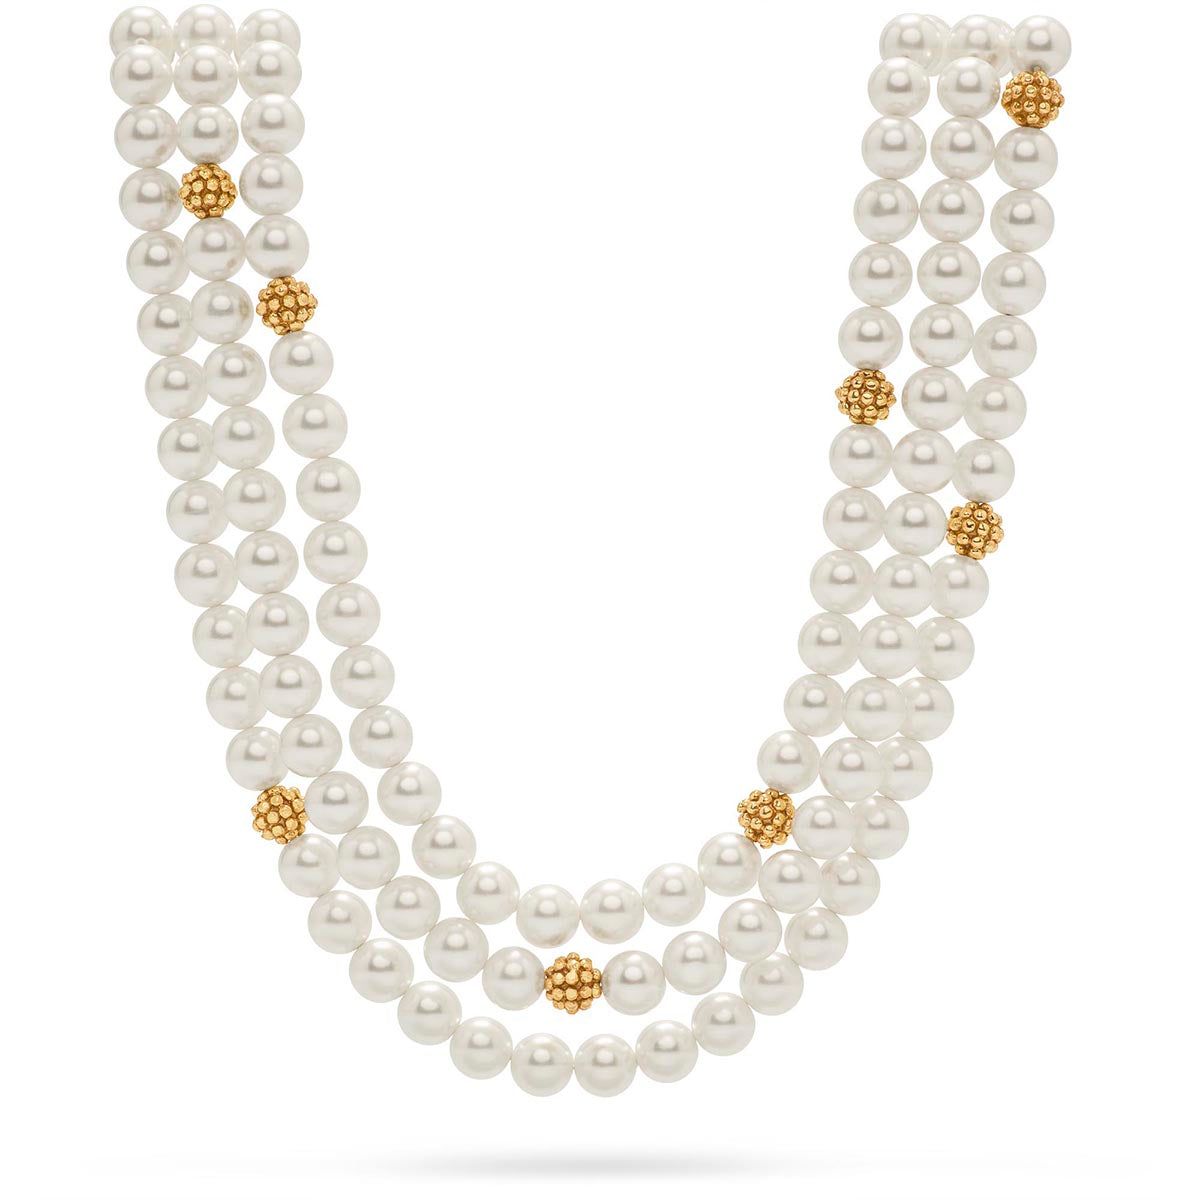 Berry & Bead Triple Strand Necklace, 18+2'' - Pearl